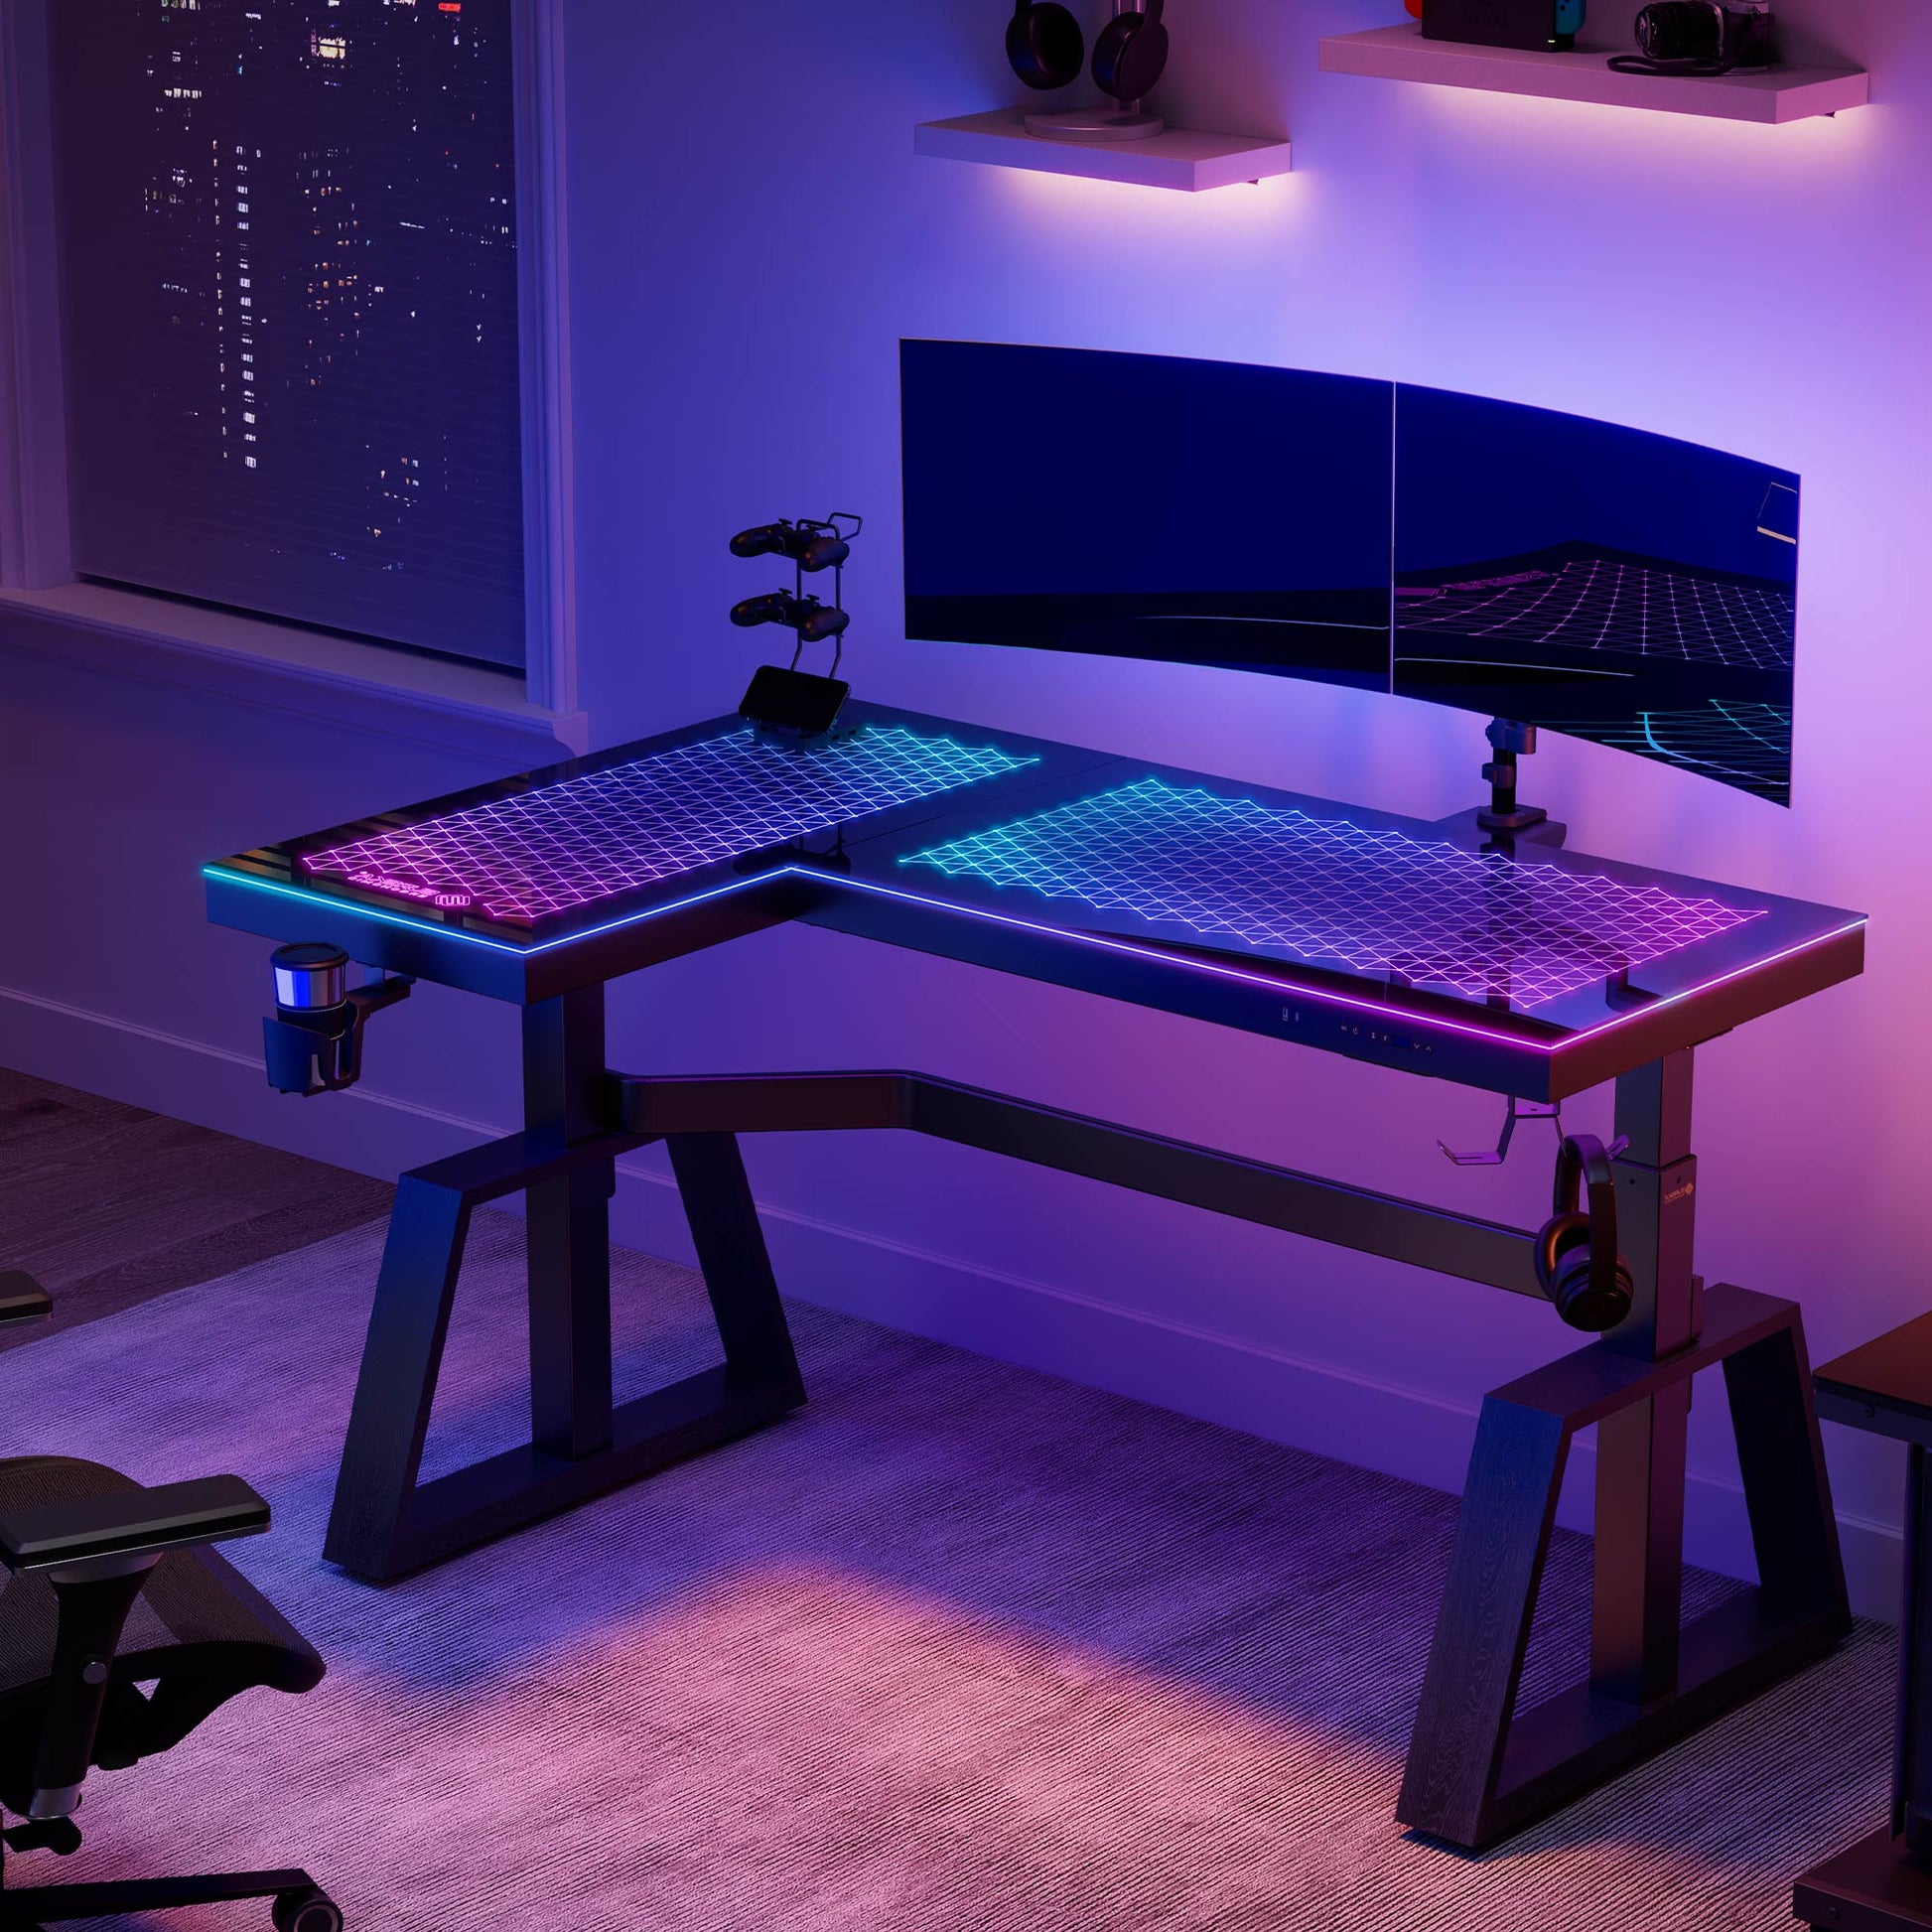 GTG-L60 PRO, L-Shaped Glass Desktop Gaming Standing Desk, Black-colored, Left Sided, RGB Light Up Gaming Desk, Glass Top, RGB Dual Monitor Lifestyle 